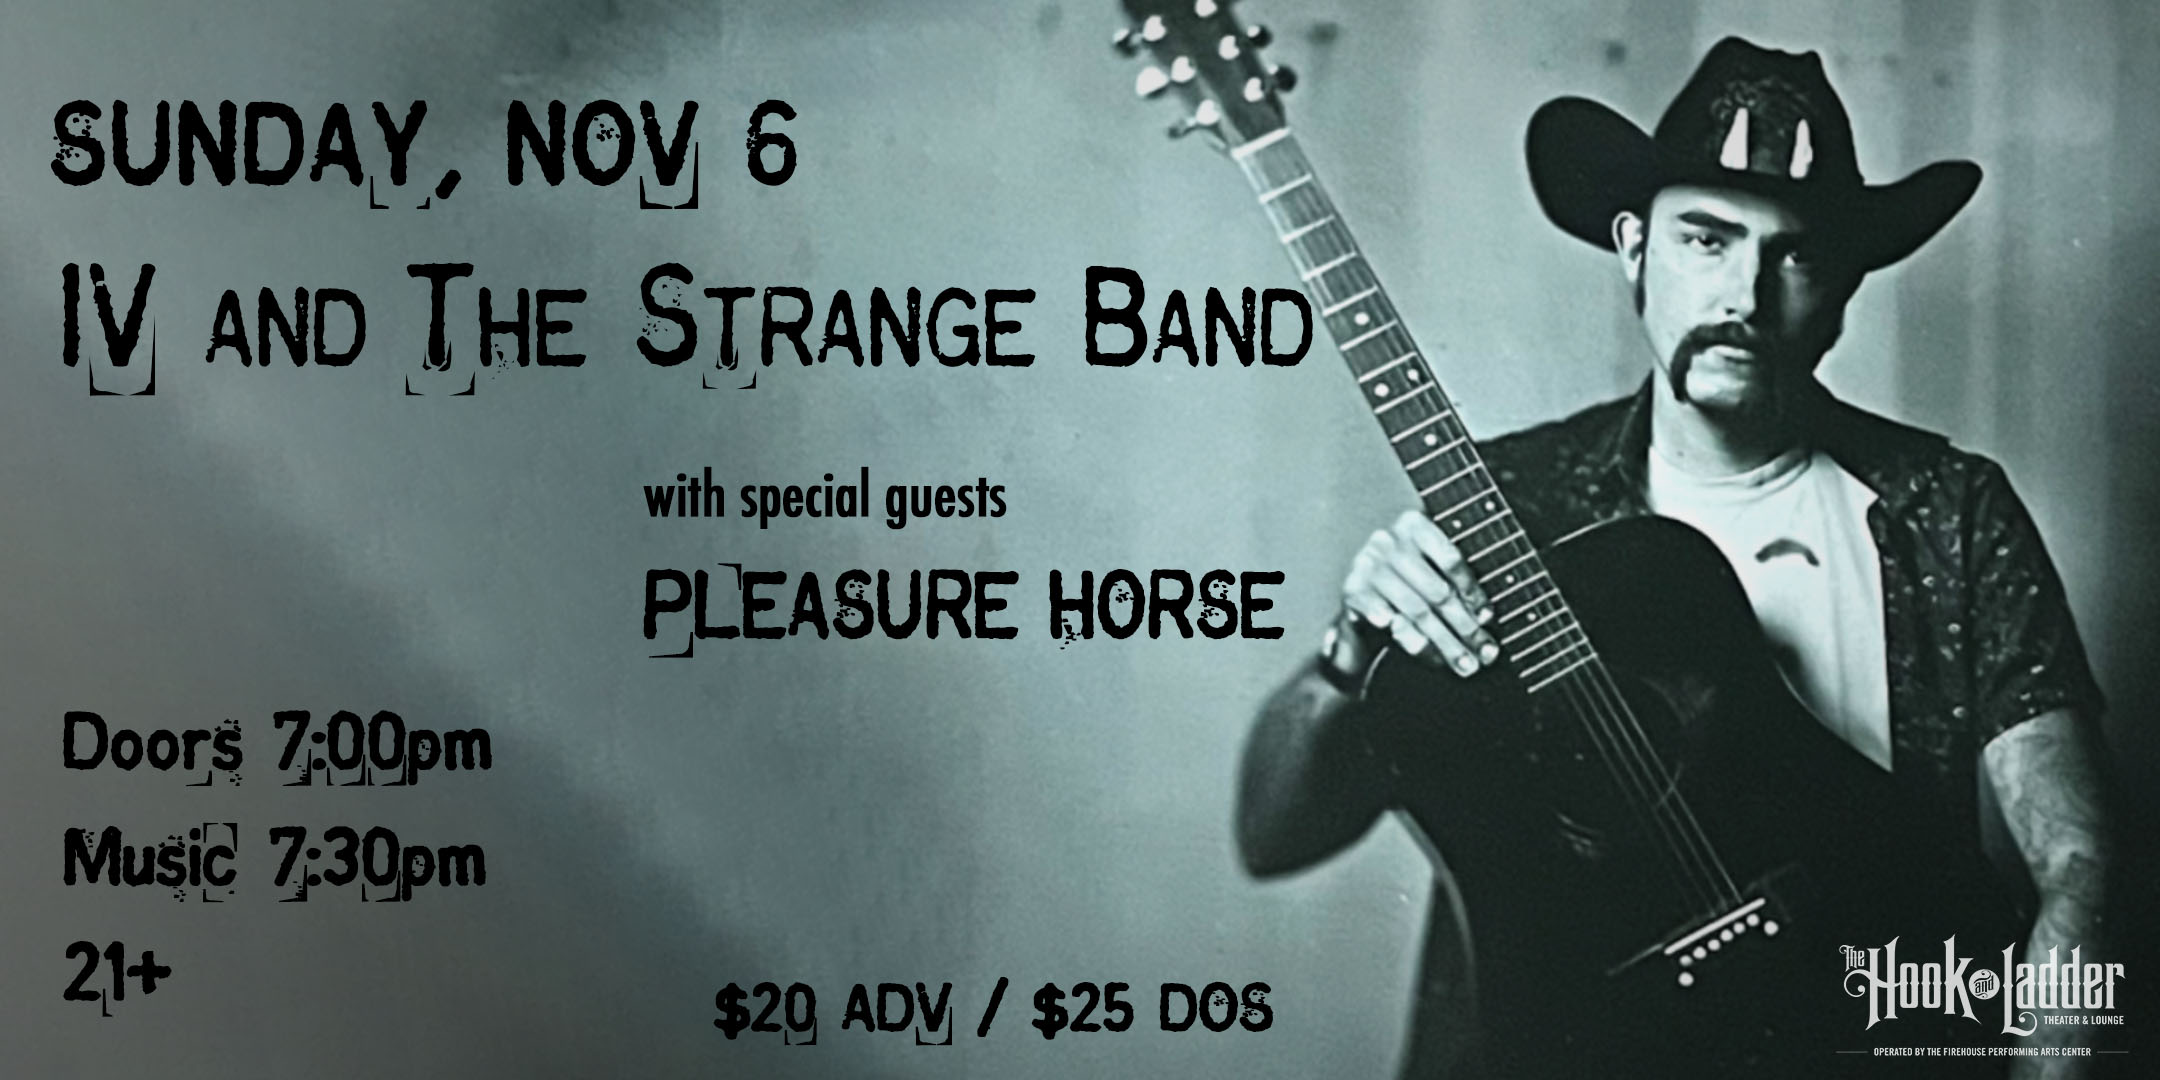 IV and The Strange Band with special guests Pleasure Horse Sunday November 6 The Hook and Ladder Theater Doors 7:00pm :: Music 7:30pm :: 21+ General Admission*: $20 ADV / $25 DOS *Does not include fees NO REFUNDS